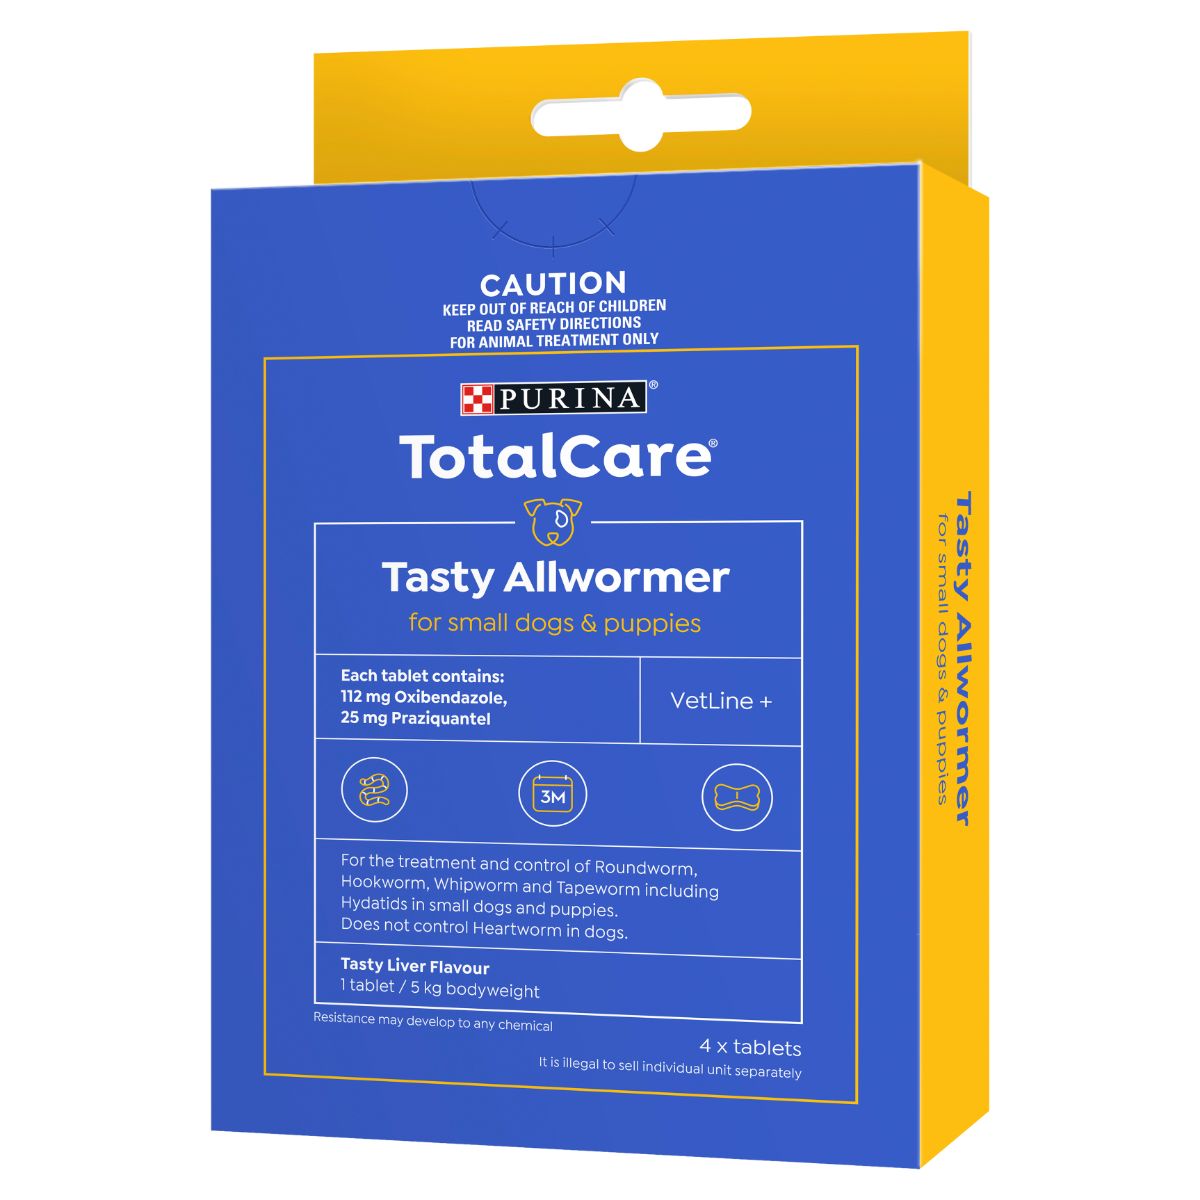 Purina Total Care Tasty Allwormer For Small Dogs & Puppies Liver Flavour 4 Tablets